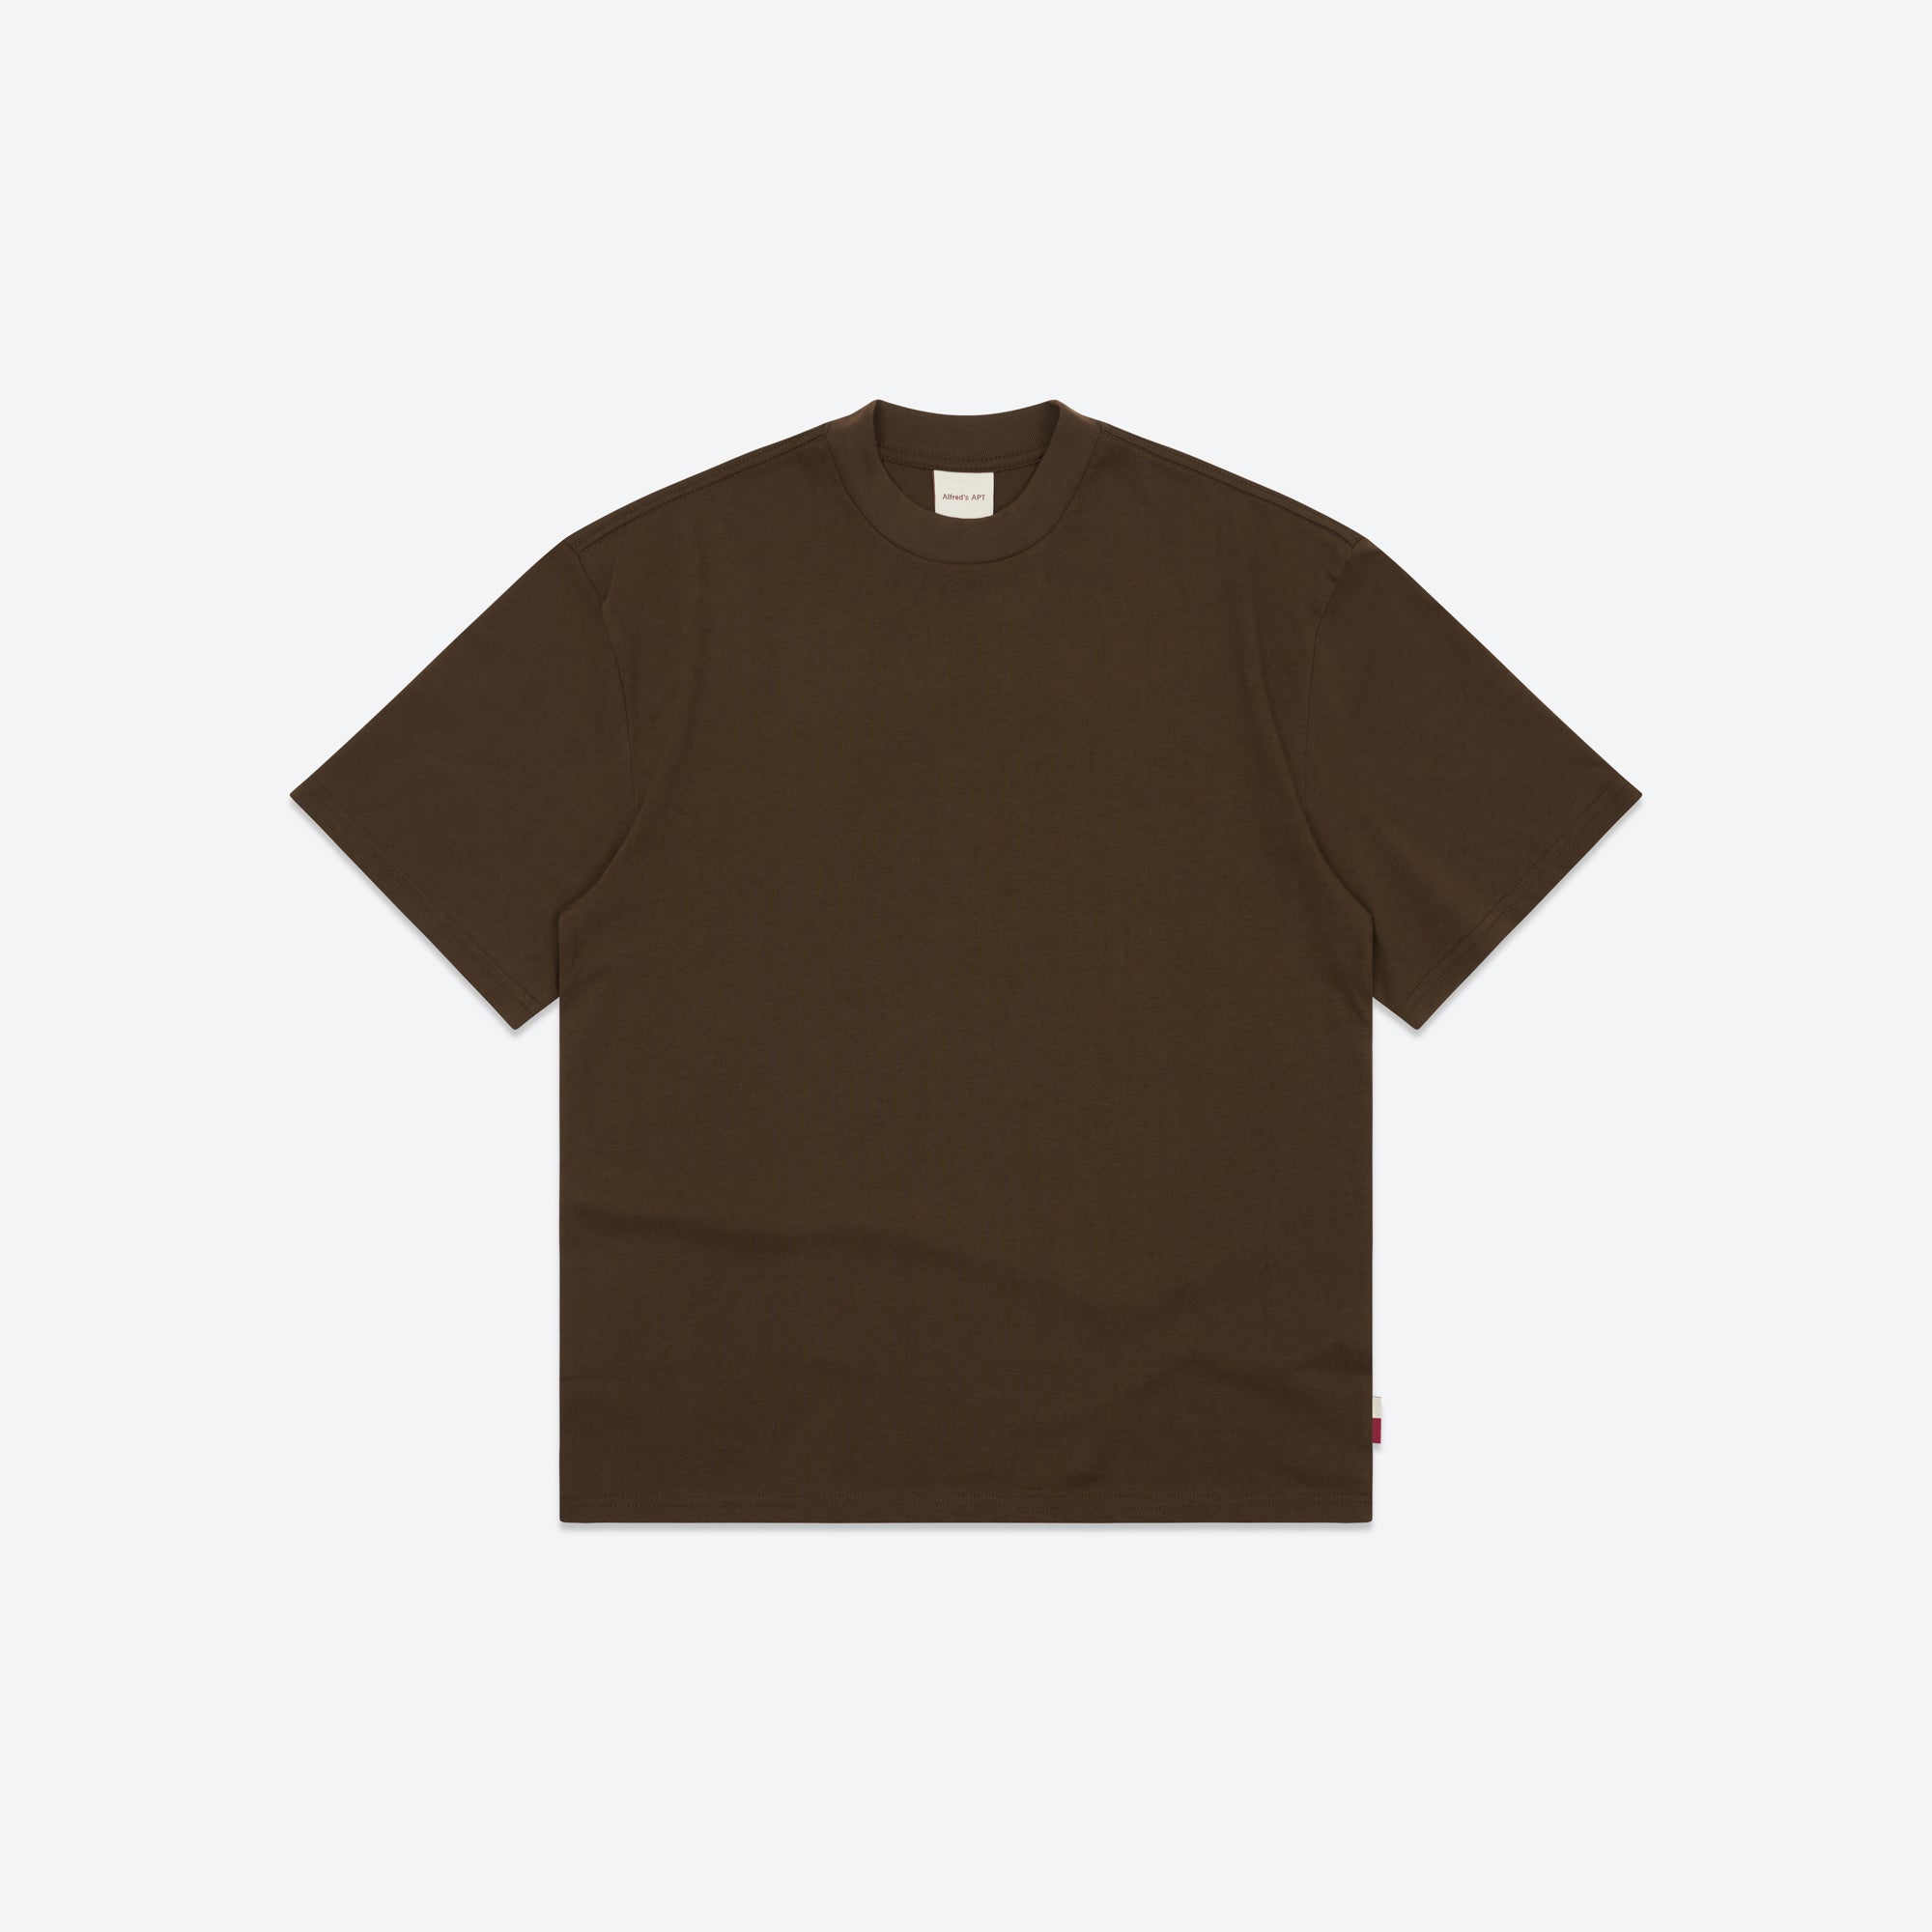 Alfred's Apartment - Trusted Tee - Chocolate